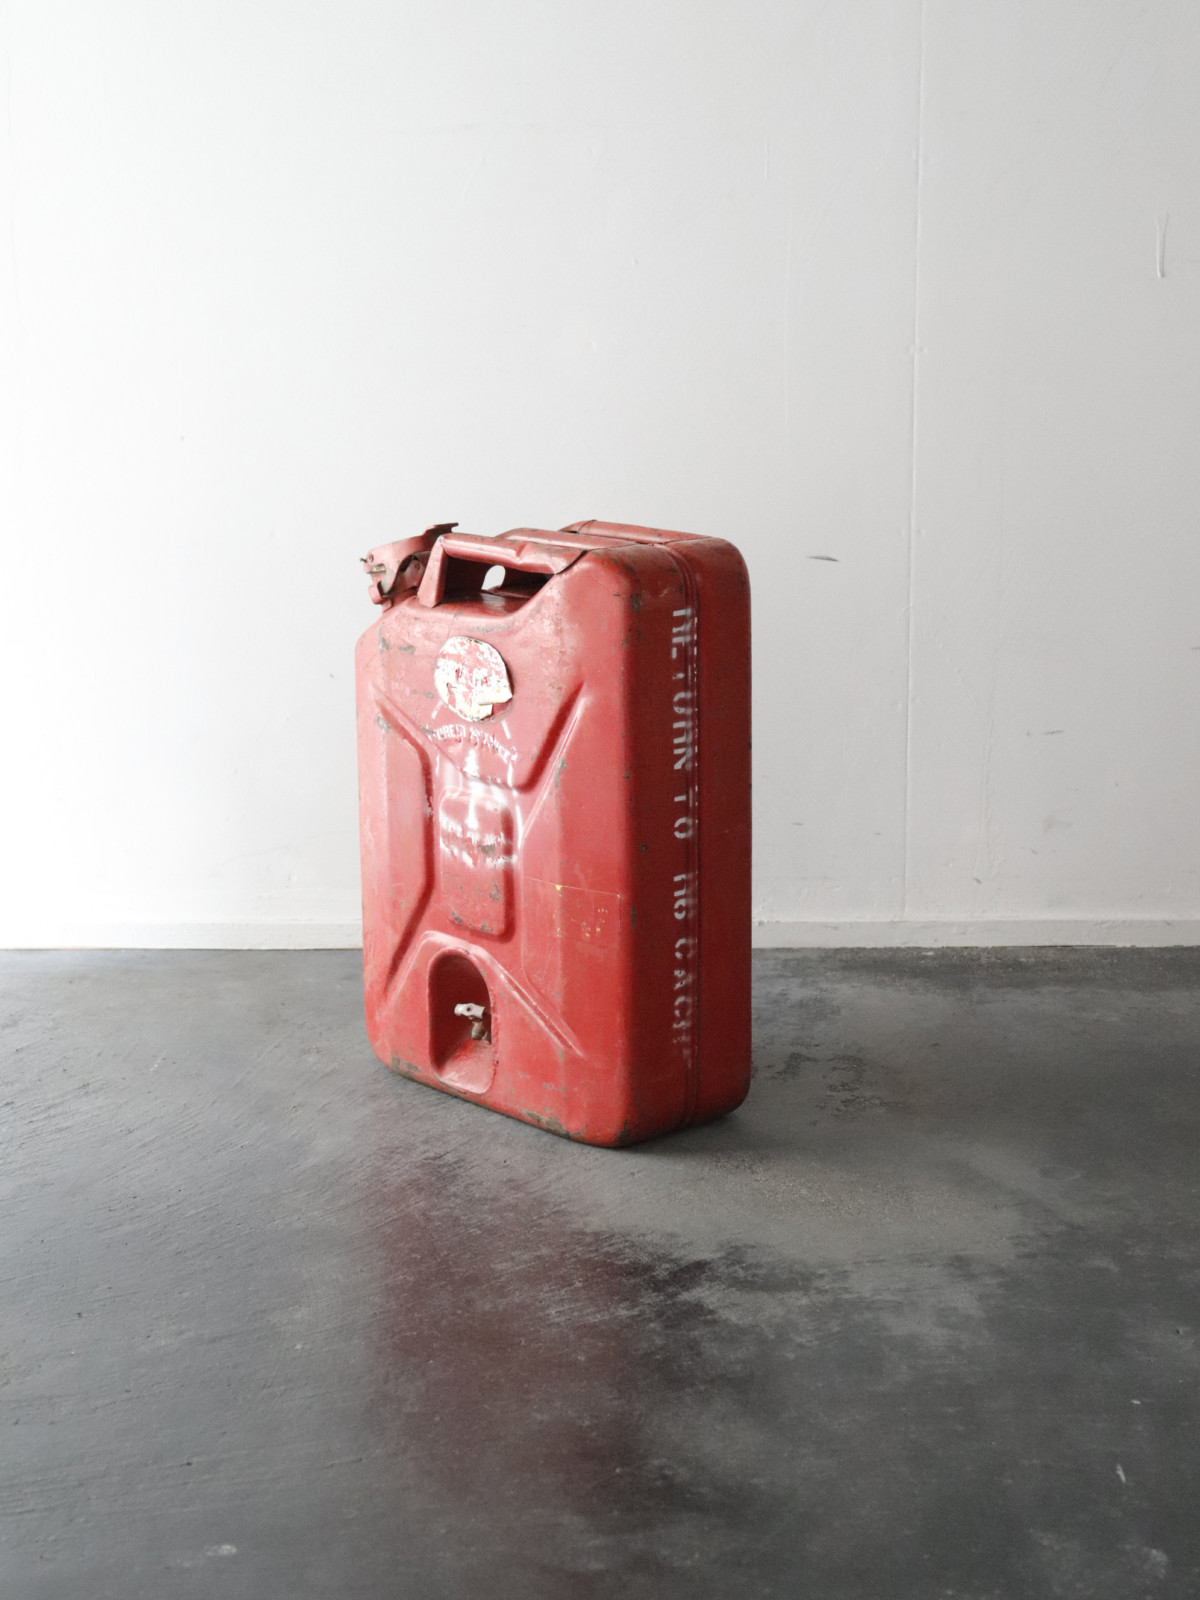 Forest service,Jerry can,USA,vintage